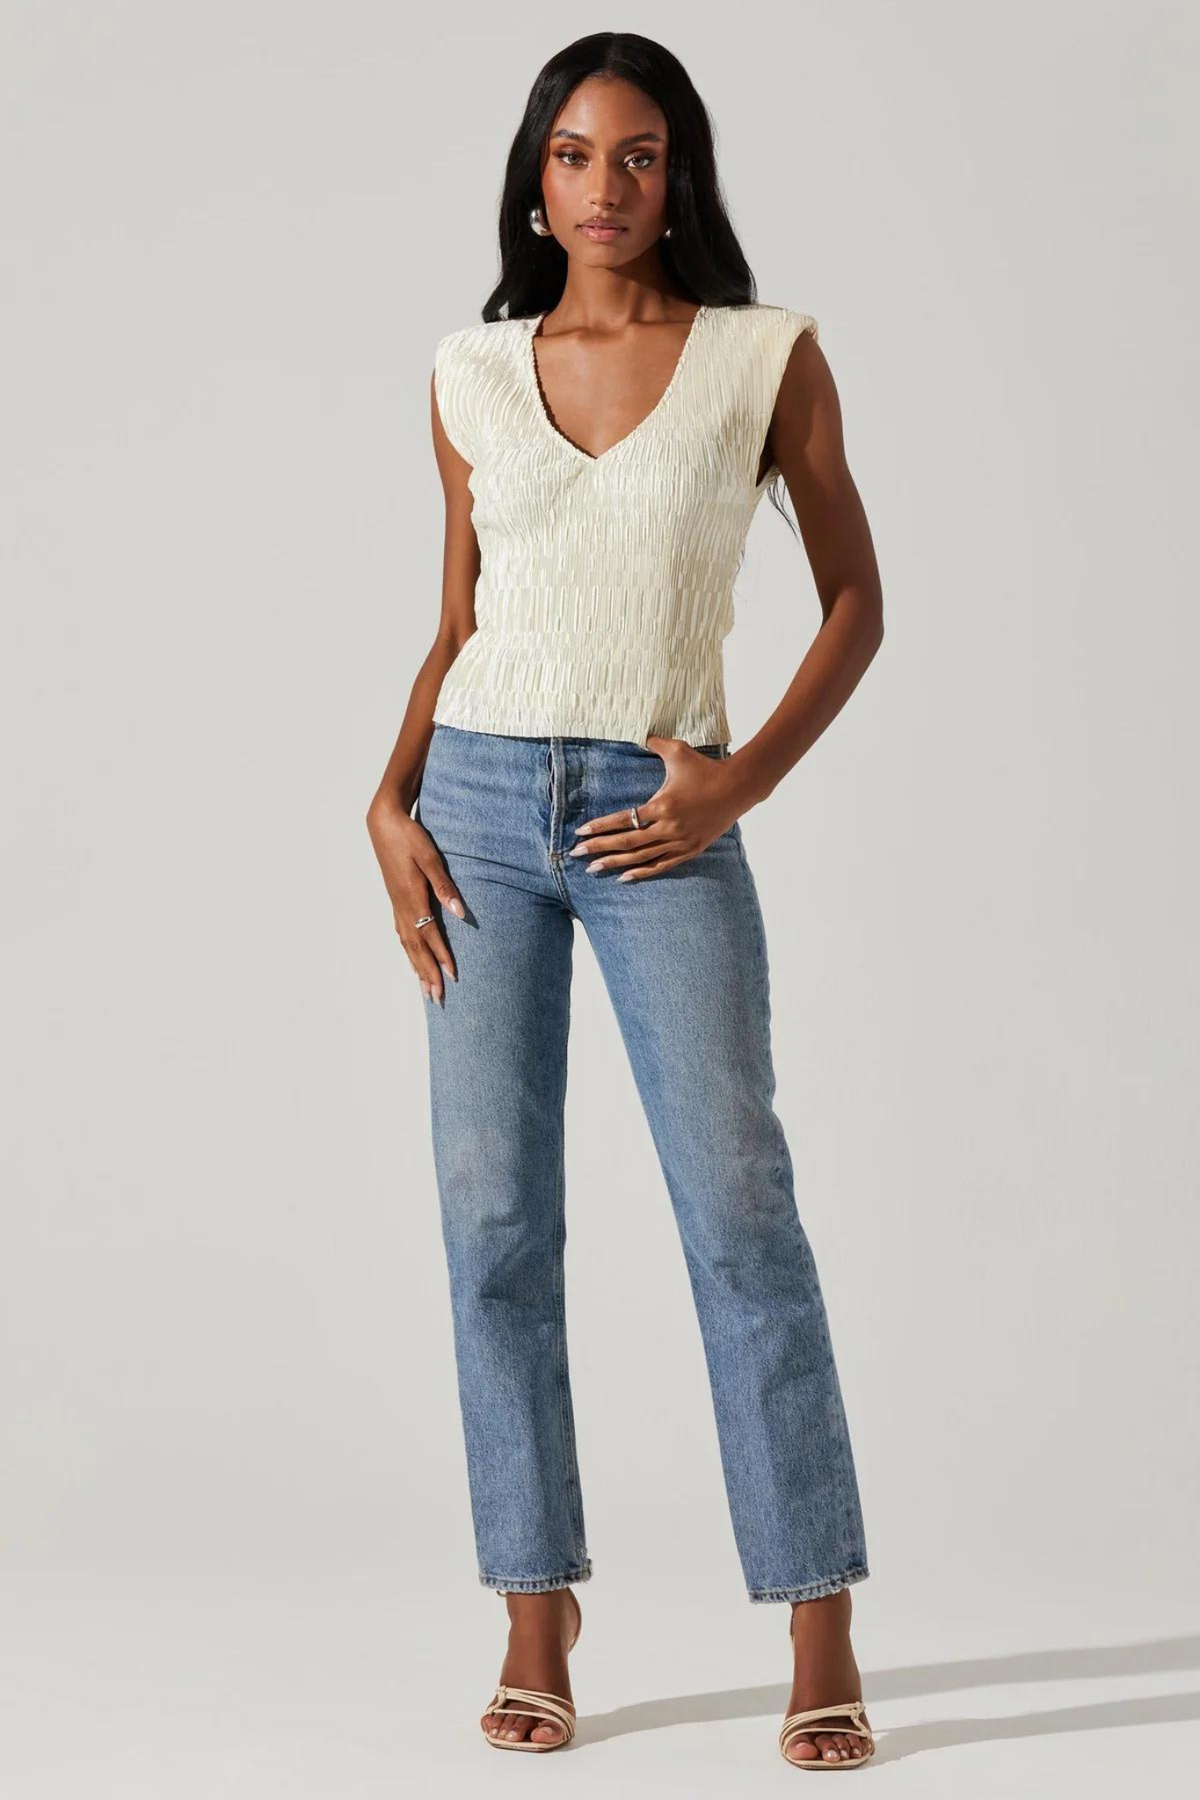 ASTR The Label | Off White Textured Nyah Top | Sweetest Stitch